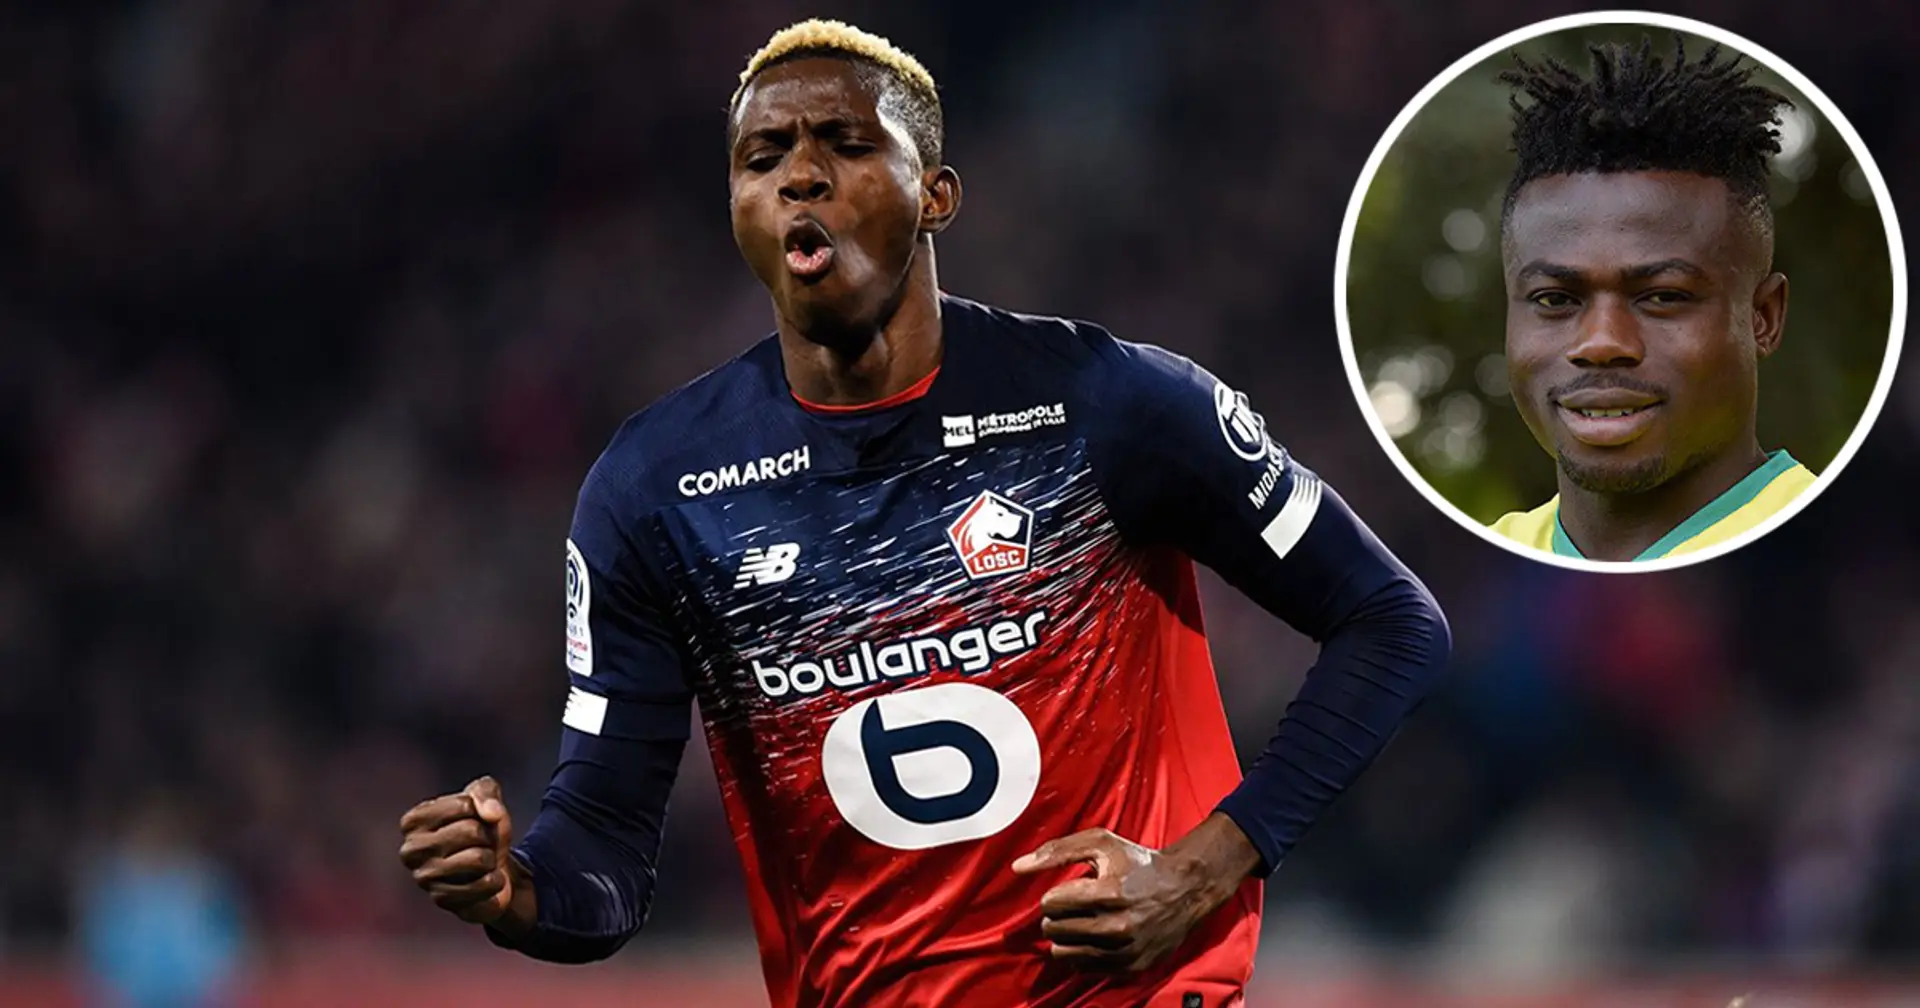 'He is still very young, strong and very good striker, a born goal poacher': Chelsea-linked Victor Osimhen tipped to join big club in future